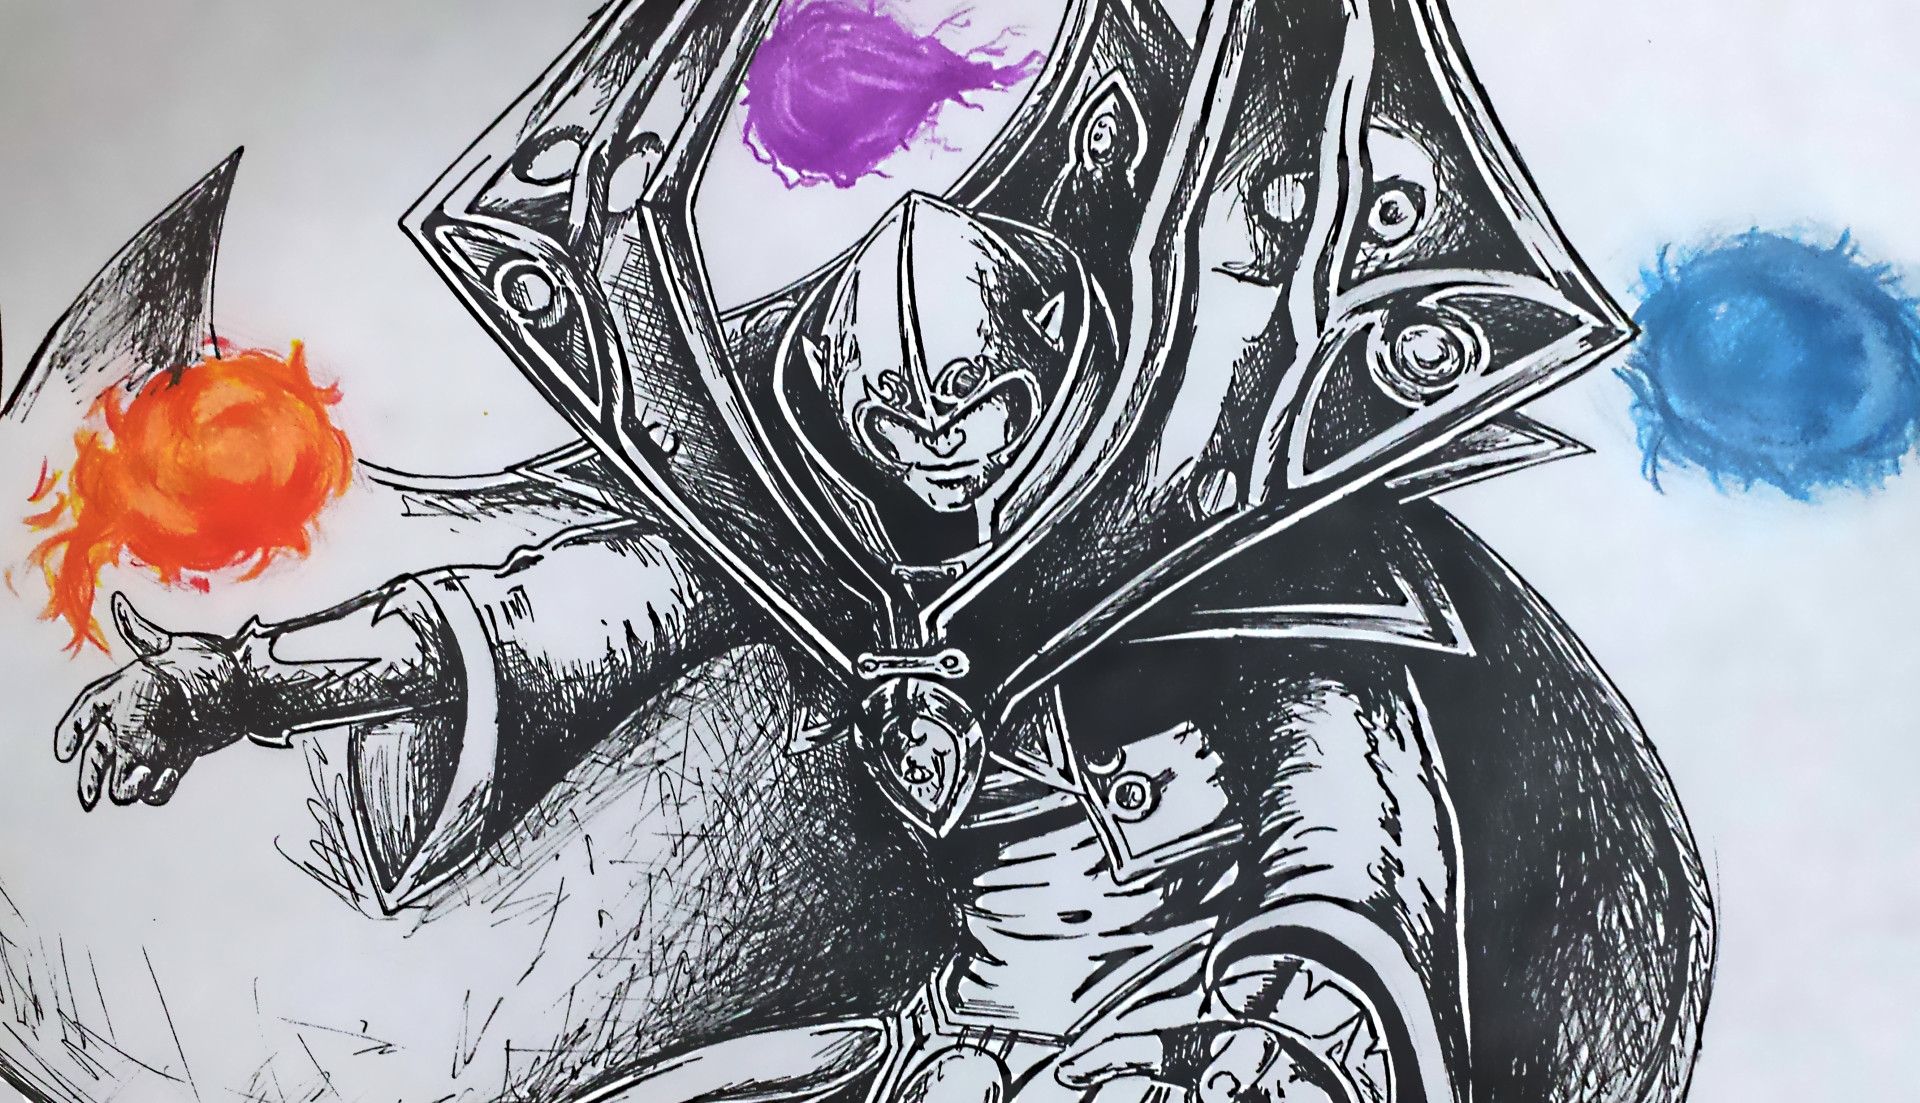 After my friend drawn the Rubick portrait, he tried Invoker too ...